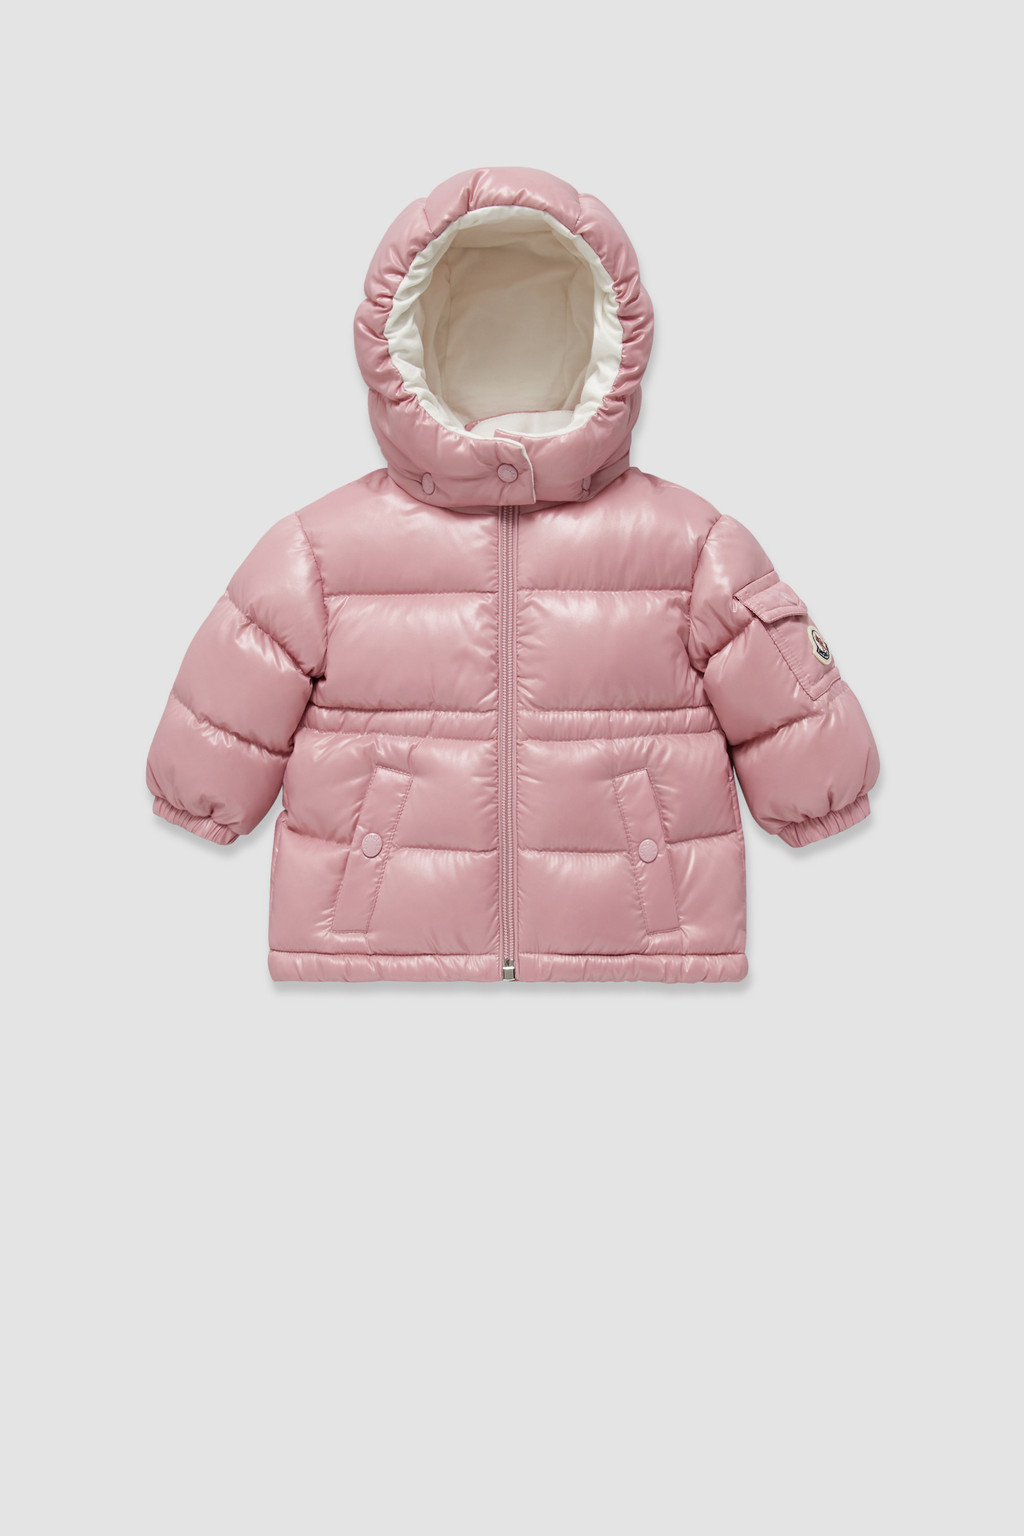 HILEELANG Toddler Baby Girl Winter Puffer Coat Hooded Light Weight Padded  Cotton Outwear Jacket Coat Pink 3T : Amazon.in: Fashion